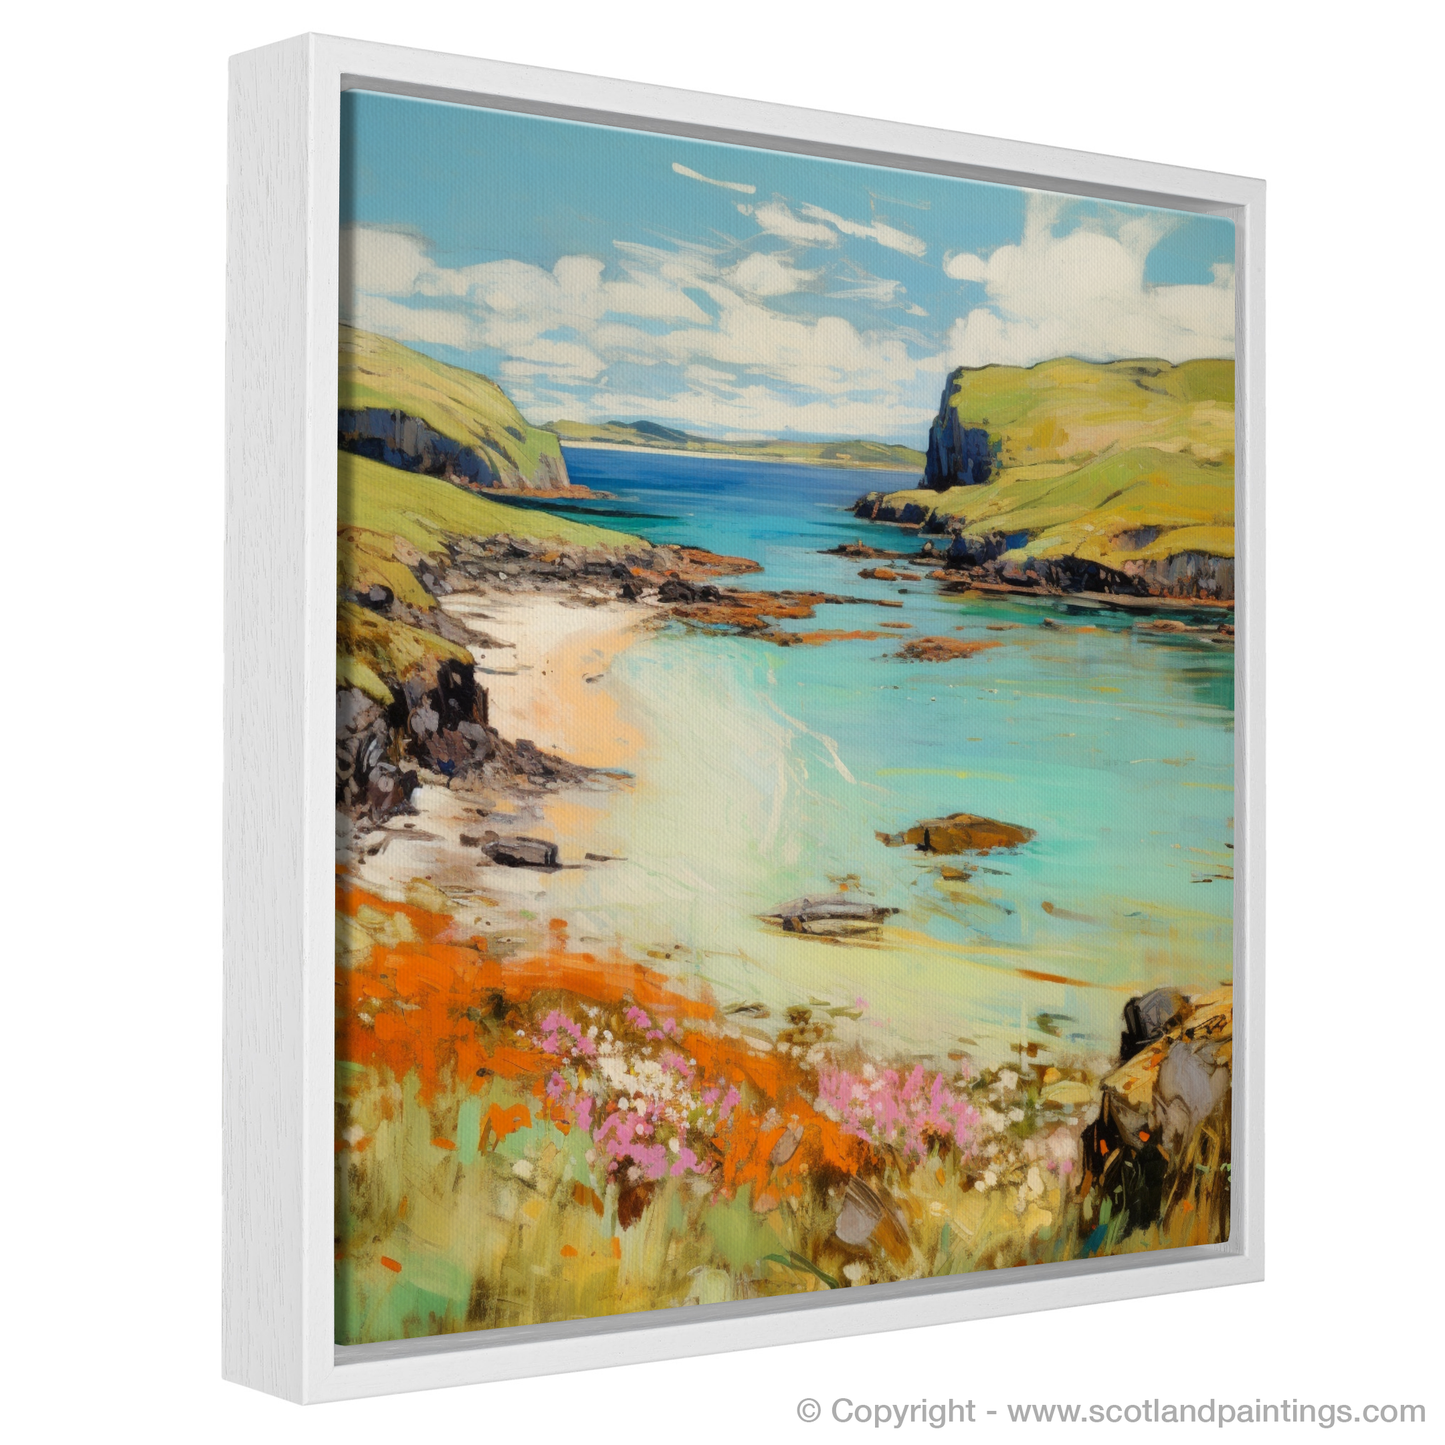 Painting and Art Print of Calgary Bay, Isle of Mull in summer entitled "Calgary Bay Serenade: A Summer's Impression".